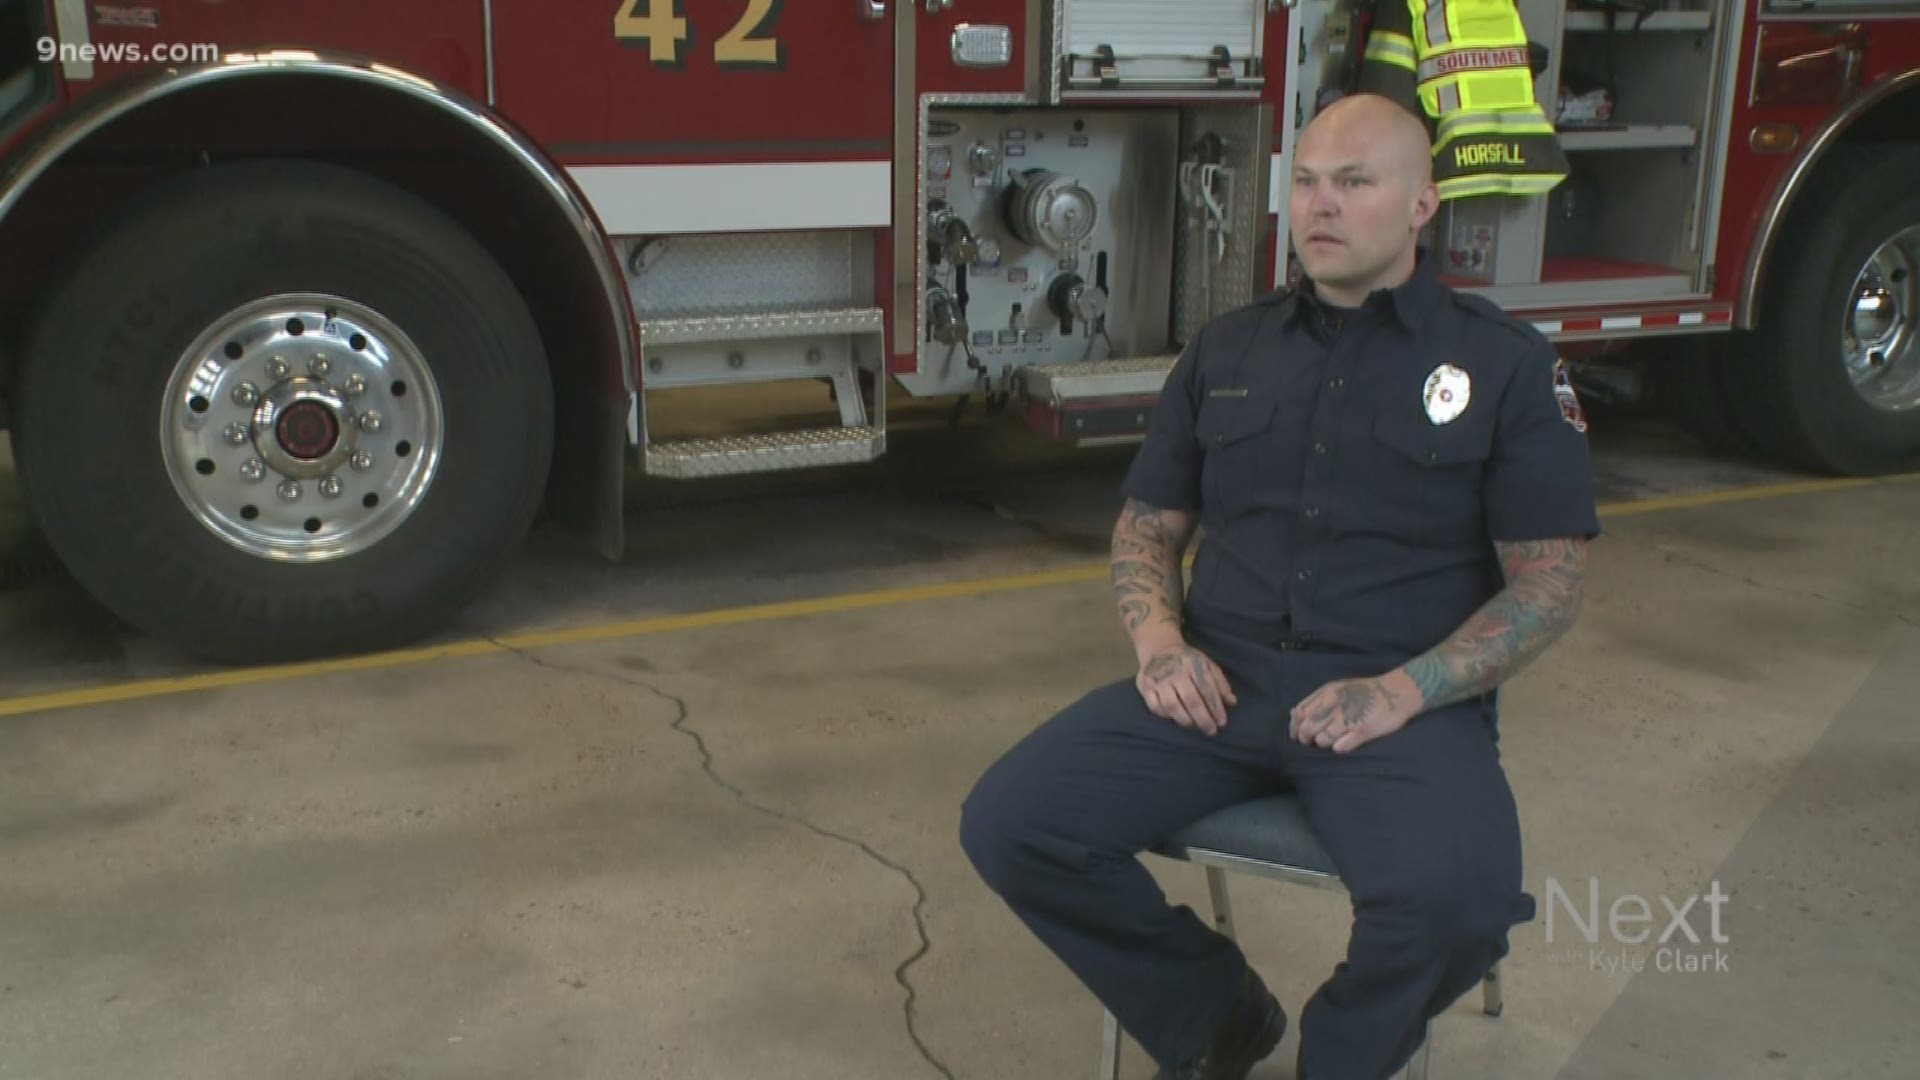 South Metro Firefighter Garrett Horsfall doesn't share why he became a firefighter often. It centers around one tragic day in high school and how he survived.